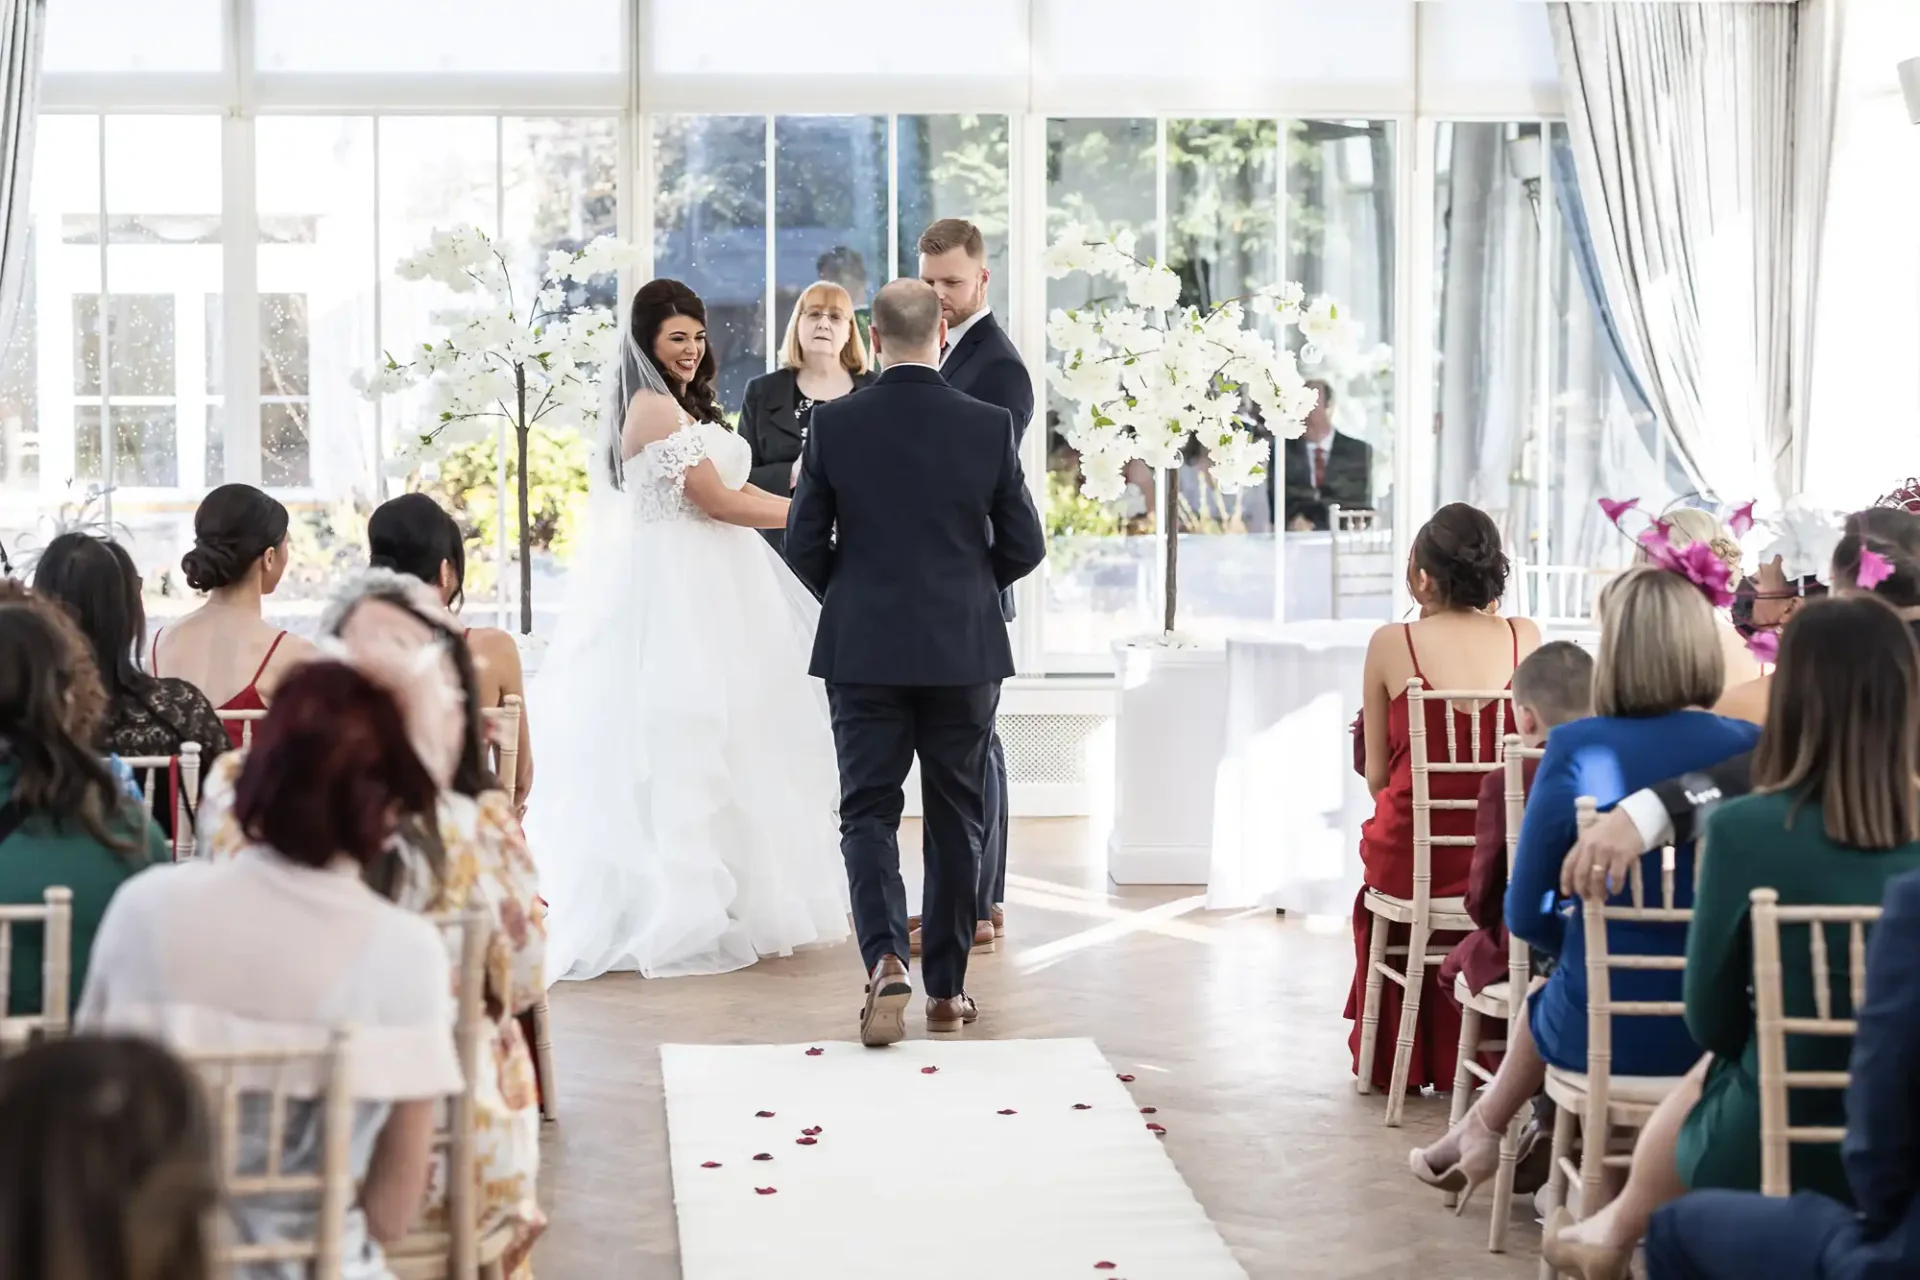 A bride and groom walking down the aisle, hand in hand, at their wedding ceremony in a bright, window-lined room filled with guests.